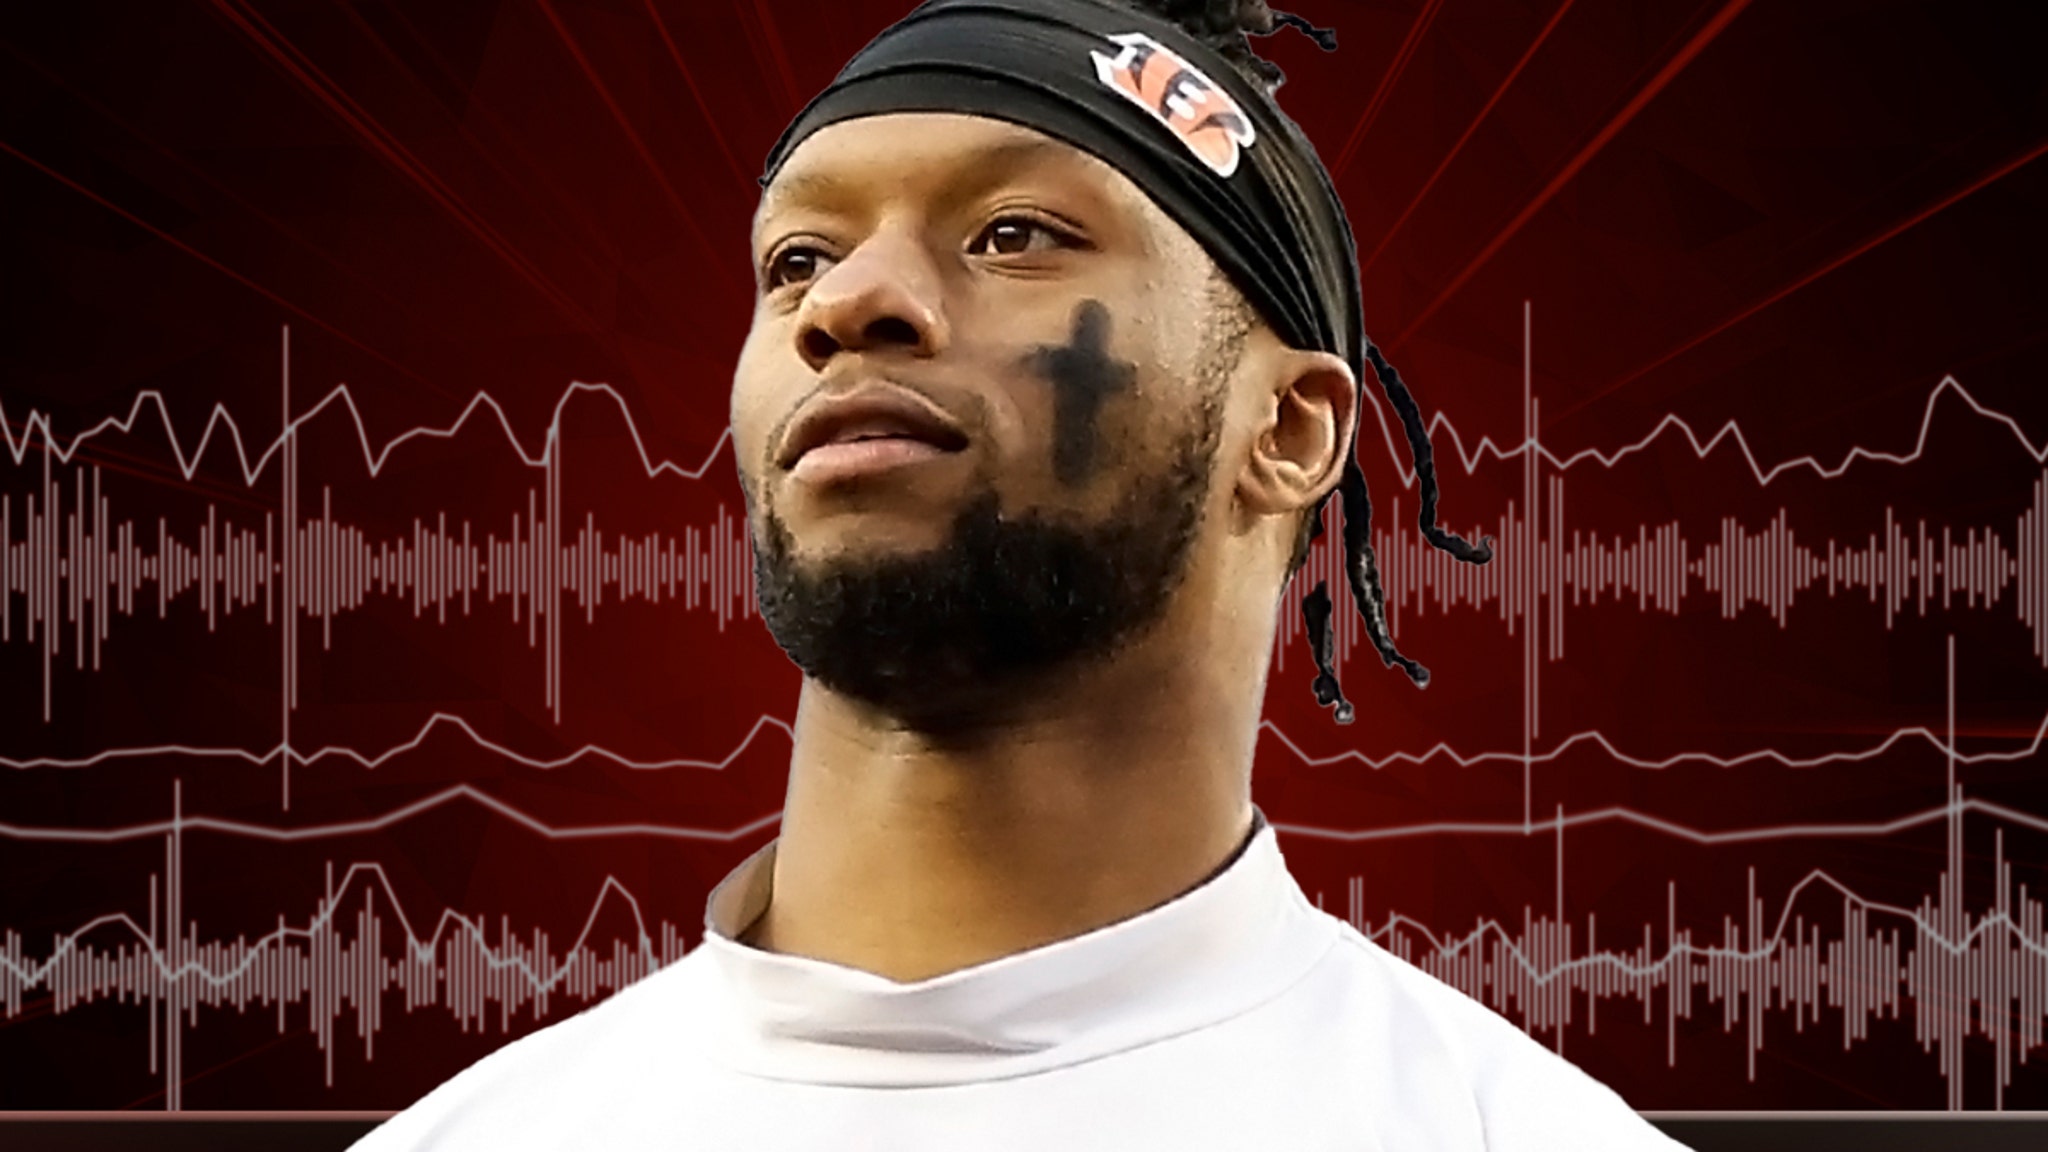 Joe Mixon’s Trainer Called 911 From NFL Star’s Home, Reported Hearing Multiple Gunshots